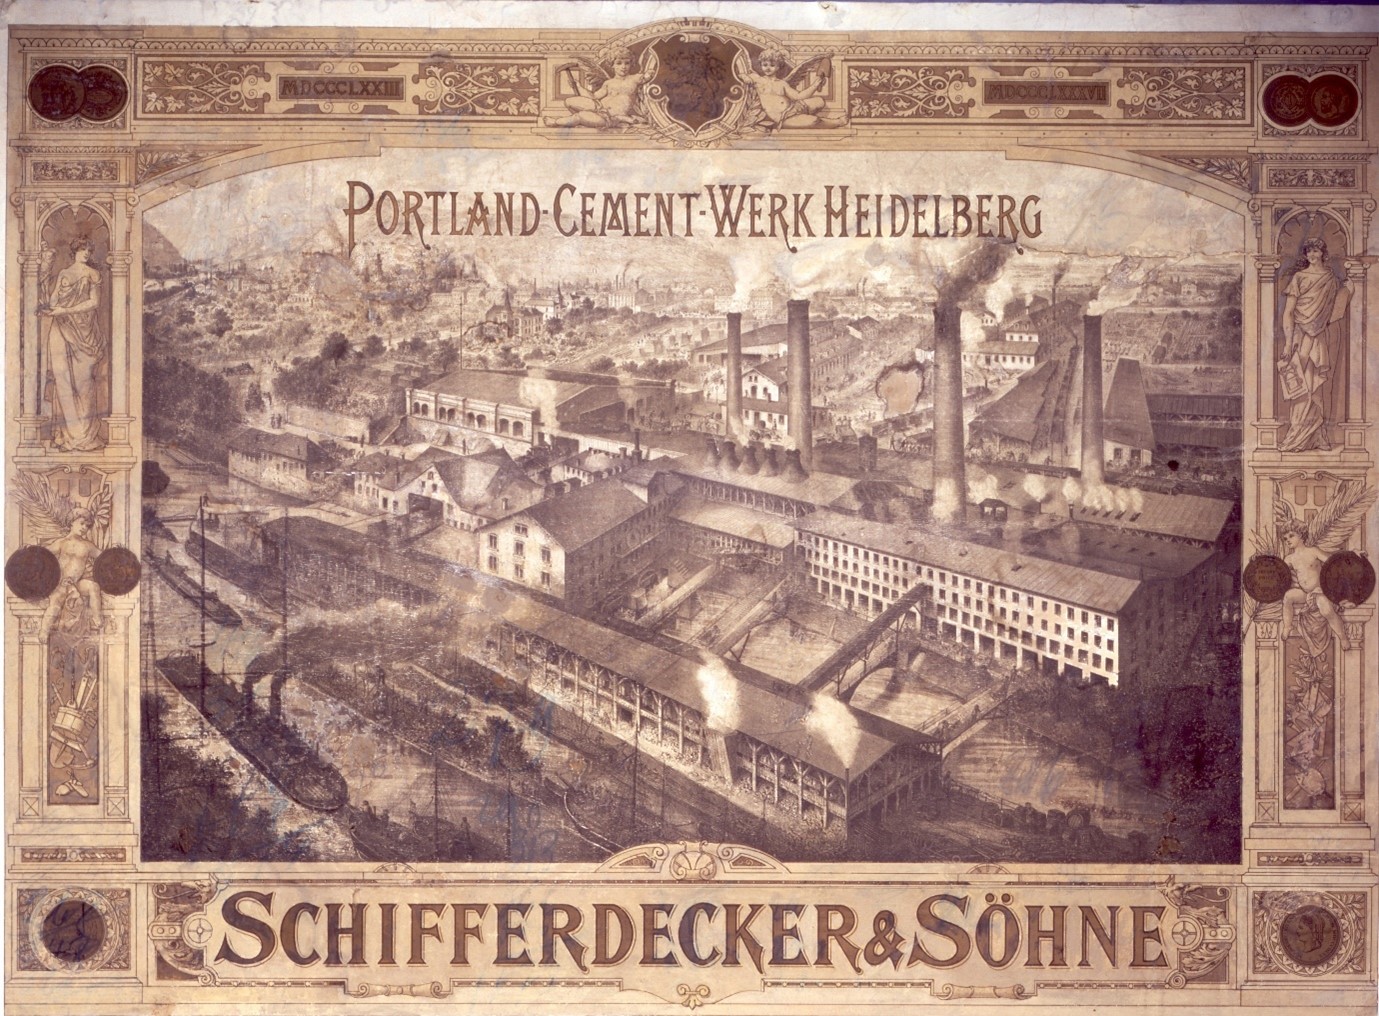 Historical picture of the "Portland Cement Plant Heidelberg": Factory complex with smoking chimneys, with "Schifferdecker & Söhne" underneath